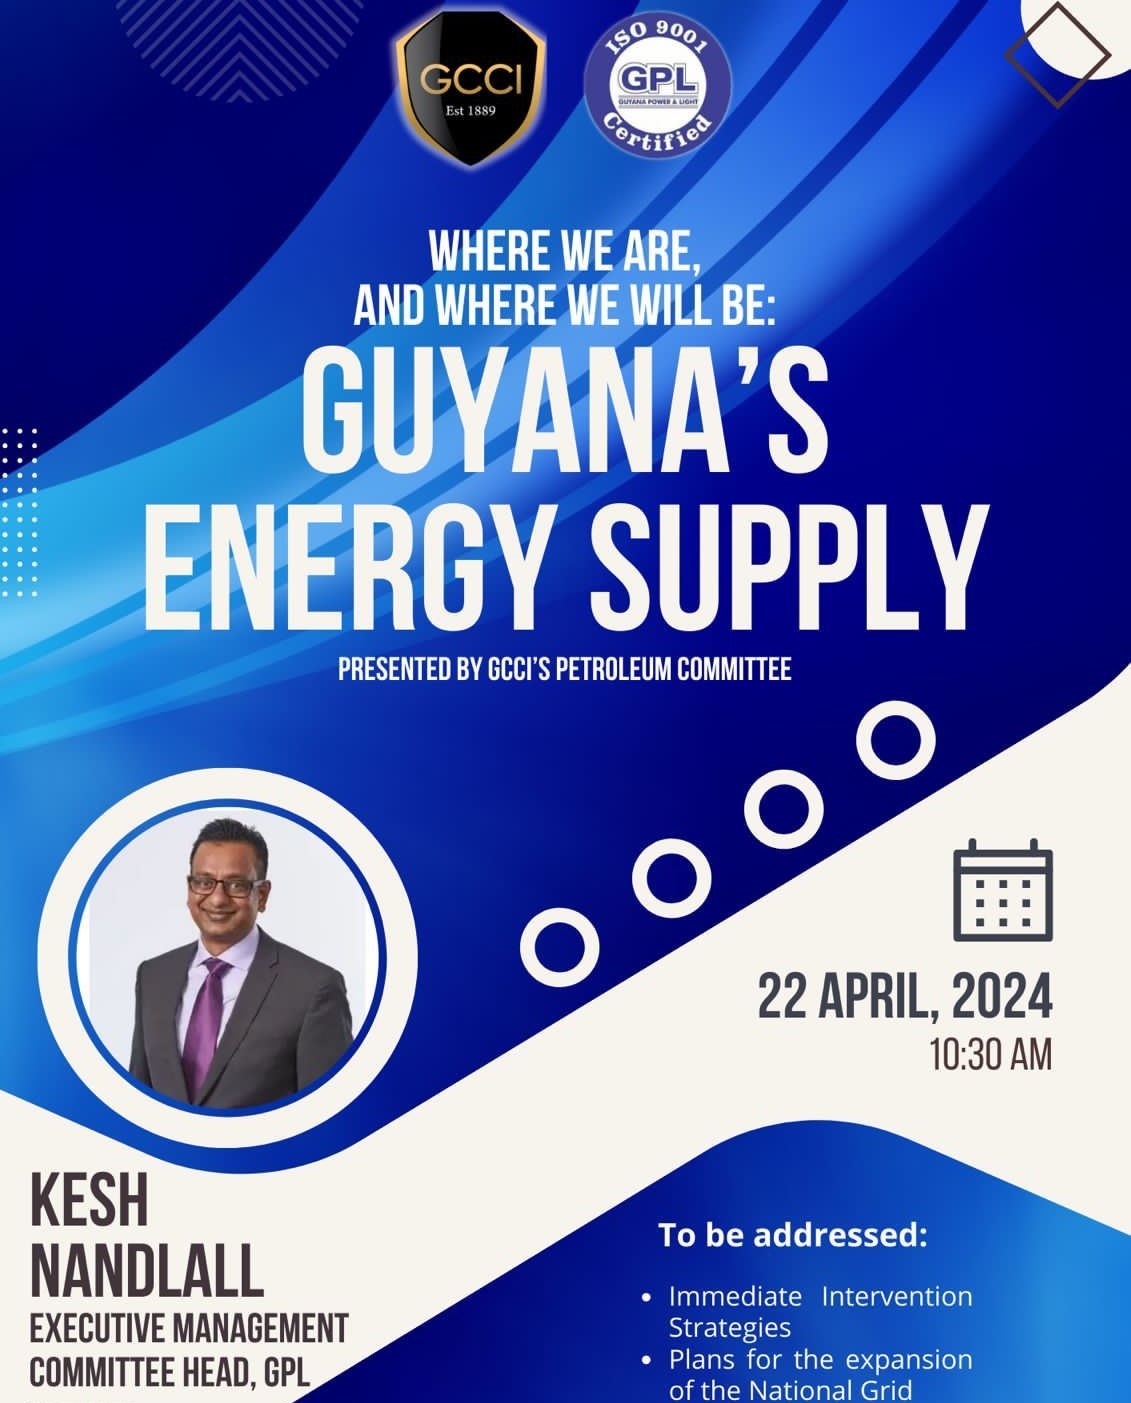 GCCI facilitates energy supply discussion forum with membership and GPL Head, Kesh Nandlall